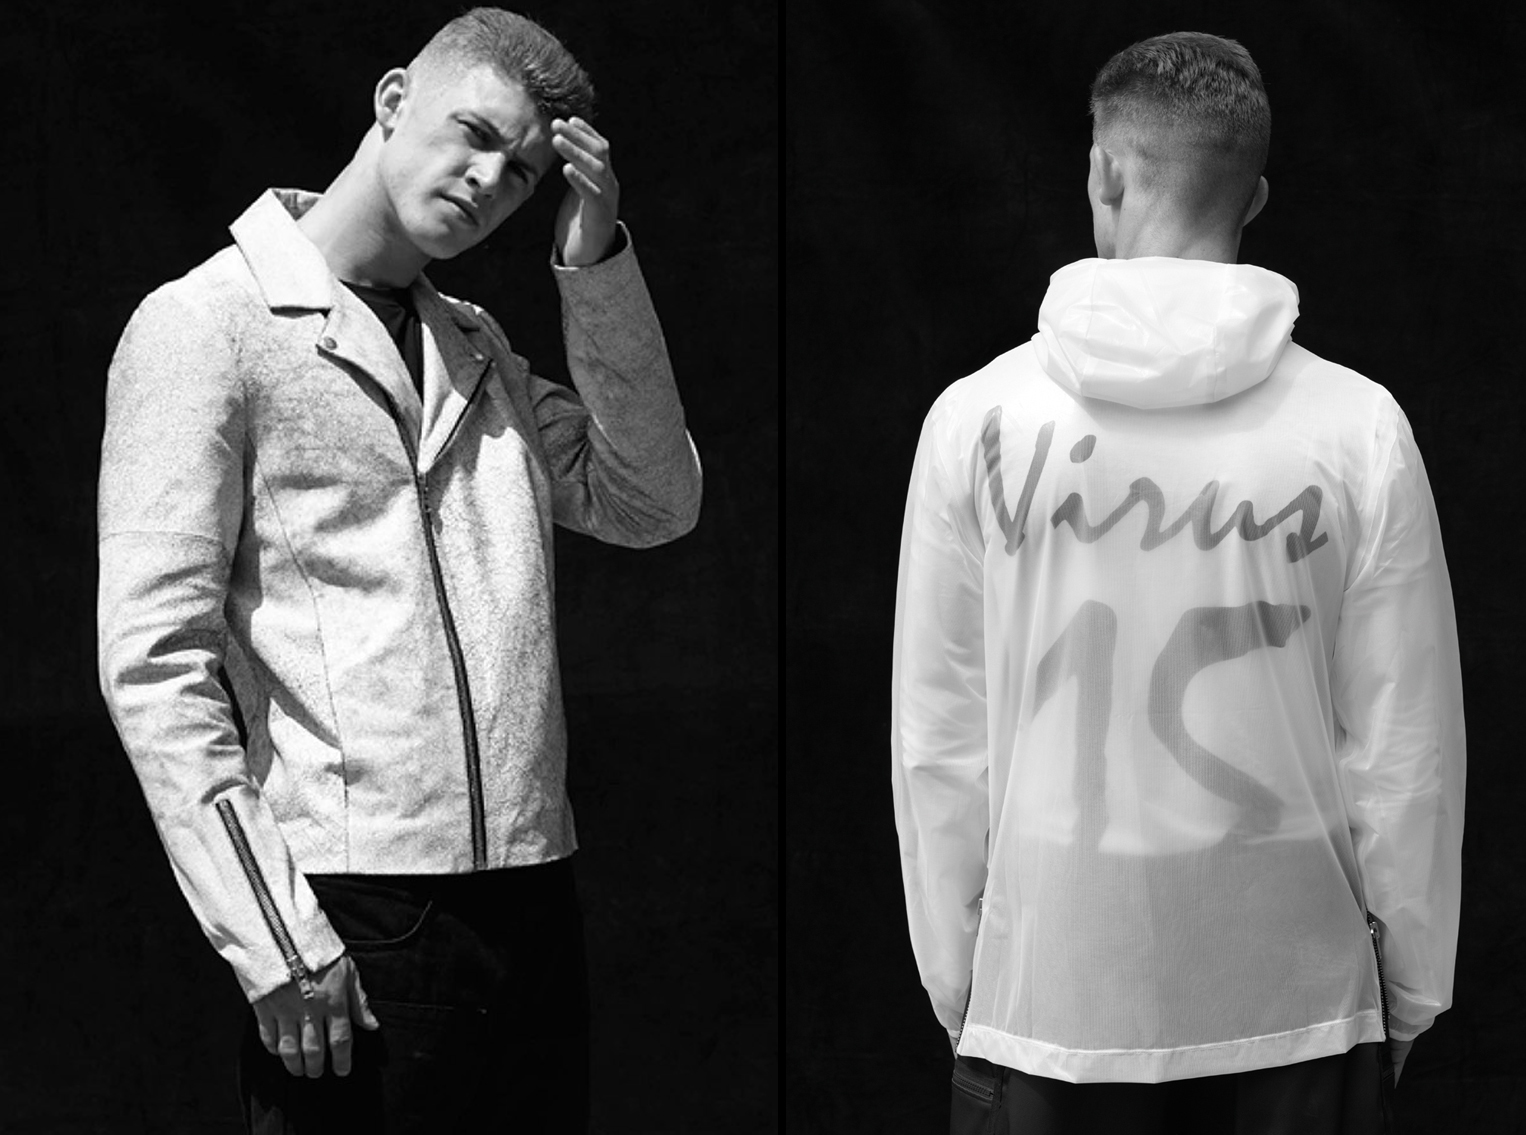 Blood Brother Spring/Summer “Virus” 2015 Collection